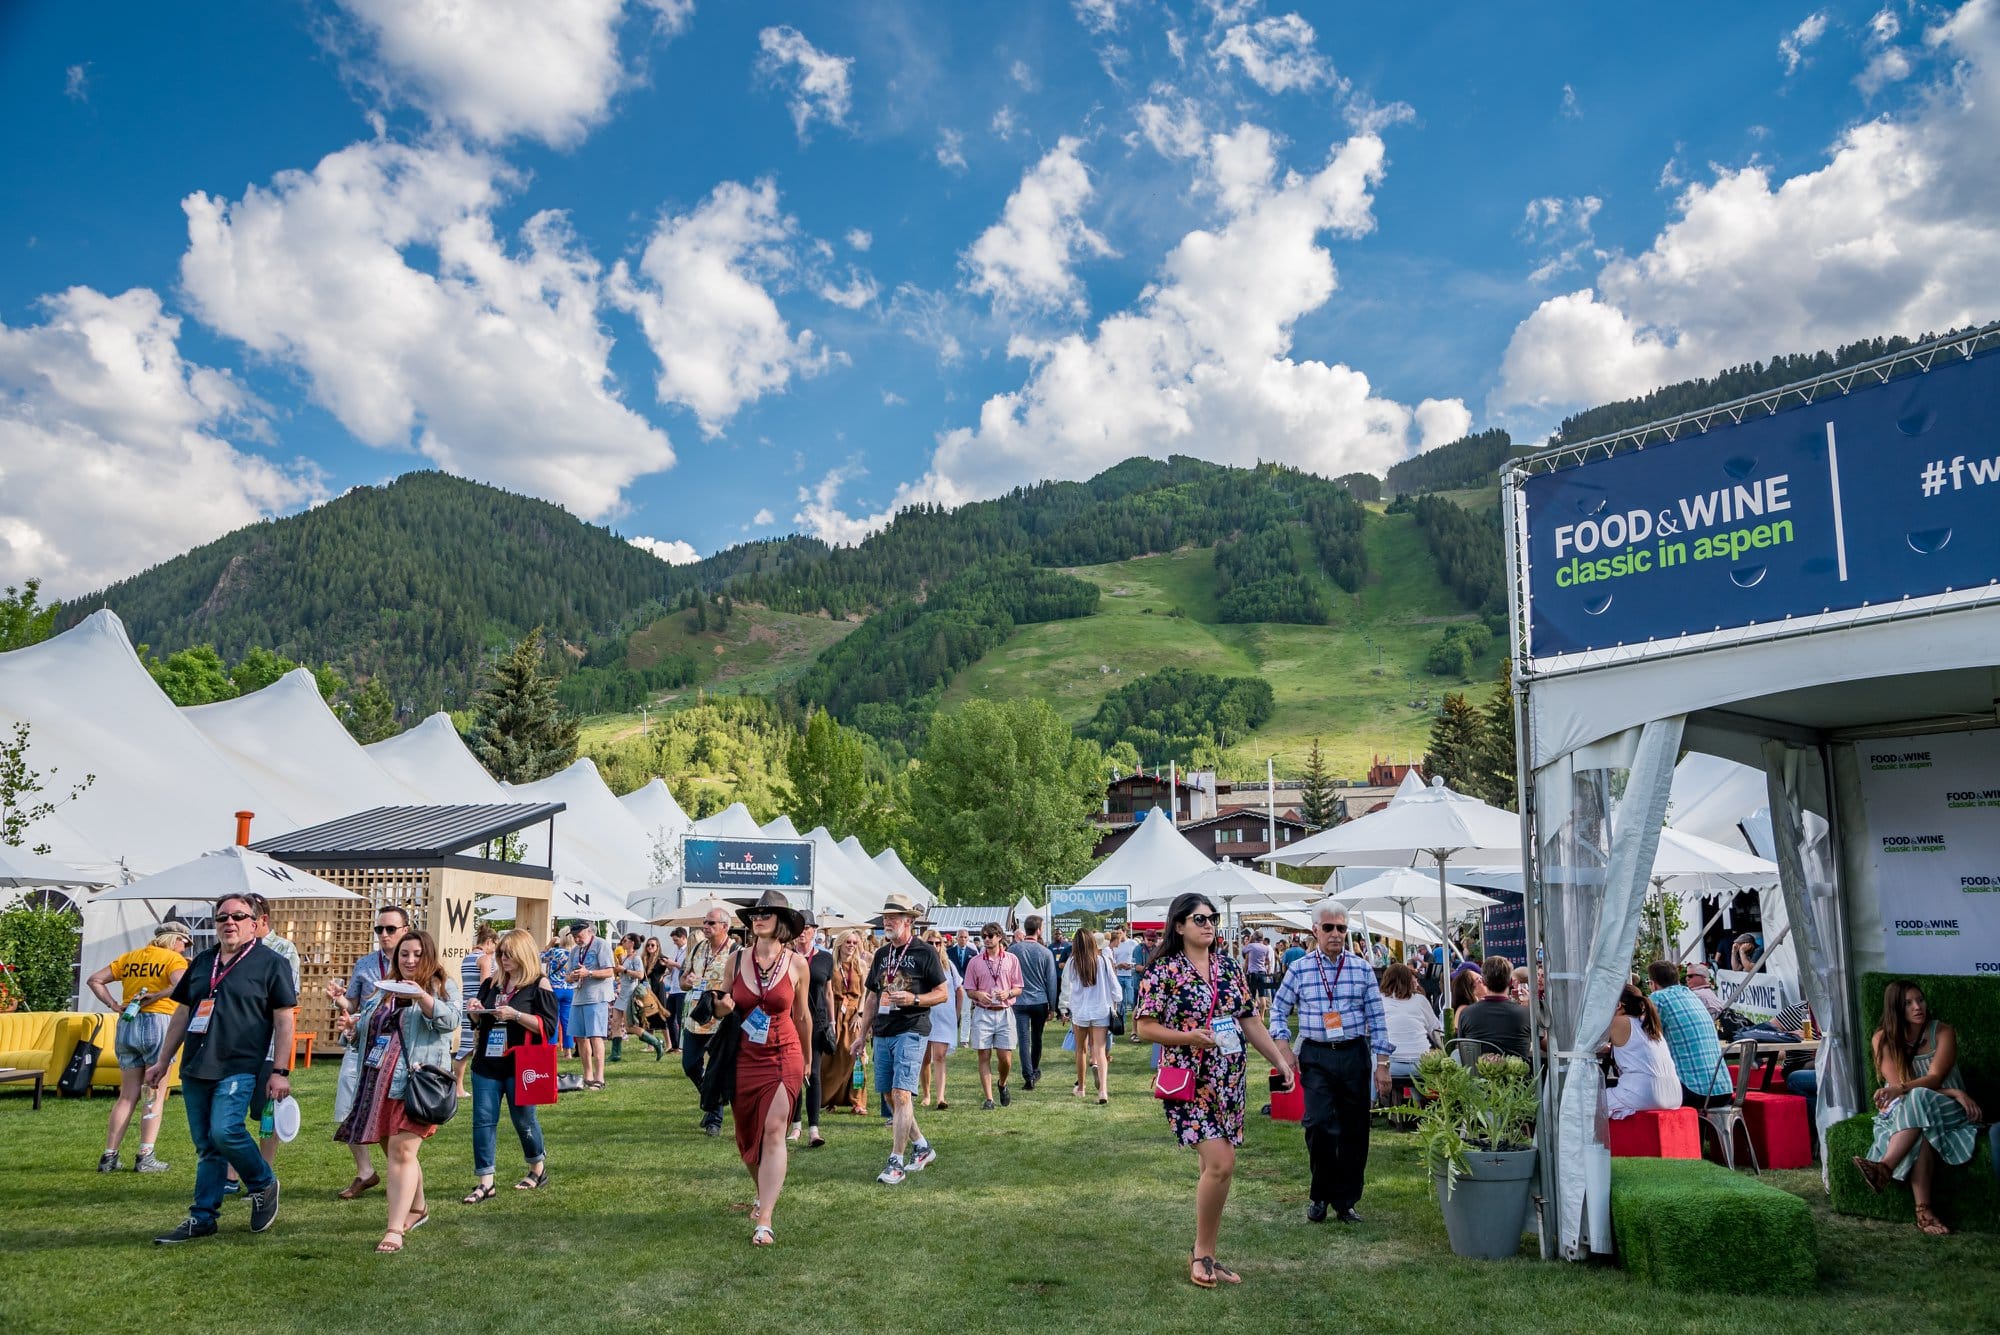 Food and wine festival in Aspen, green mountains and blue skies in the background